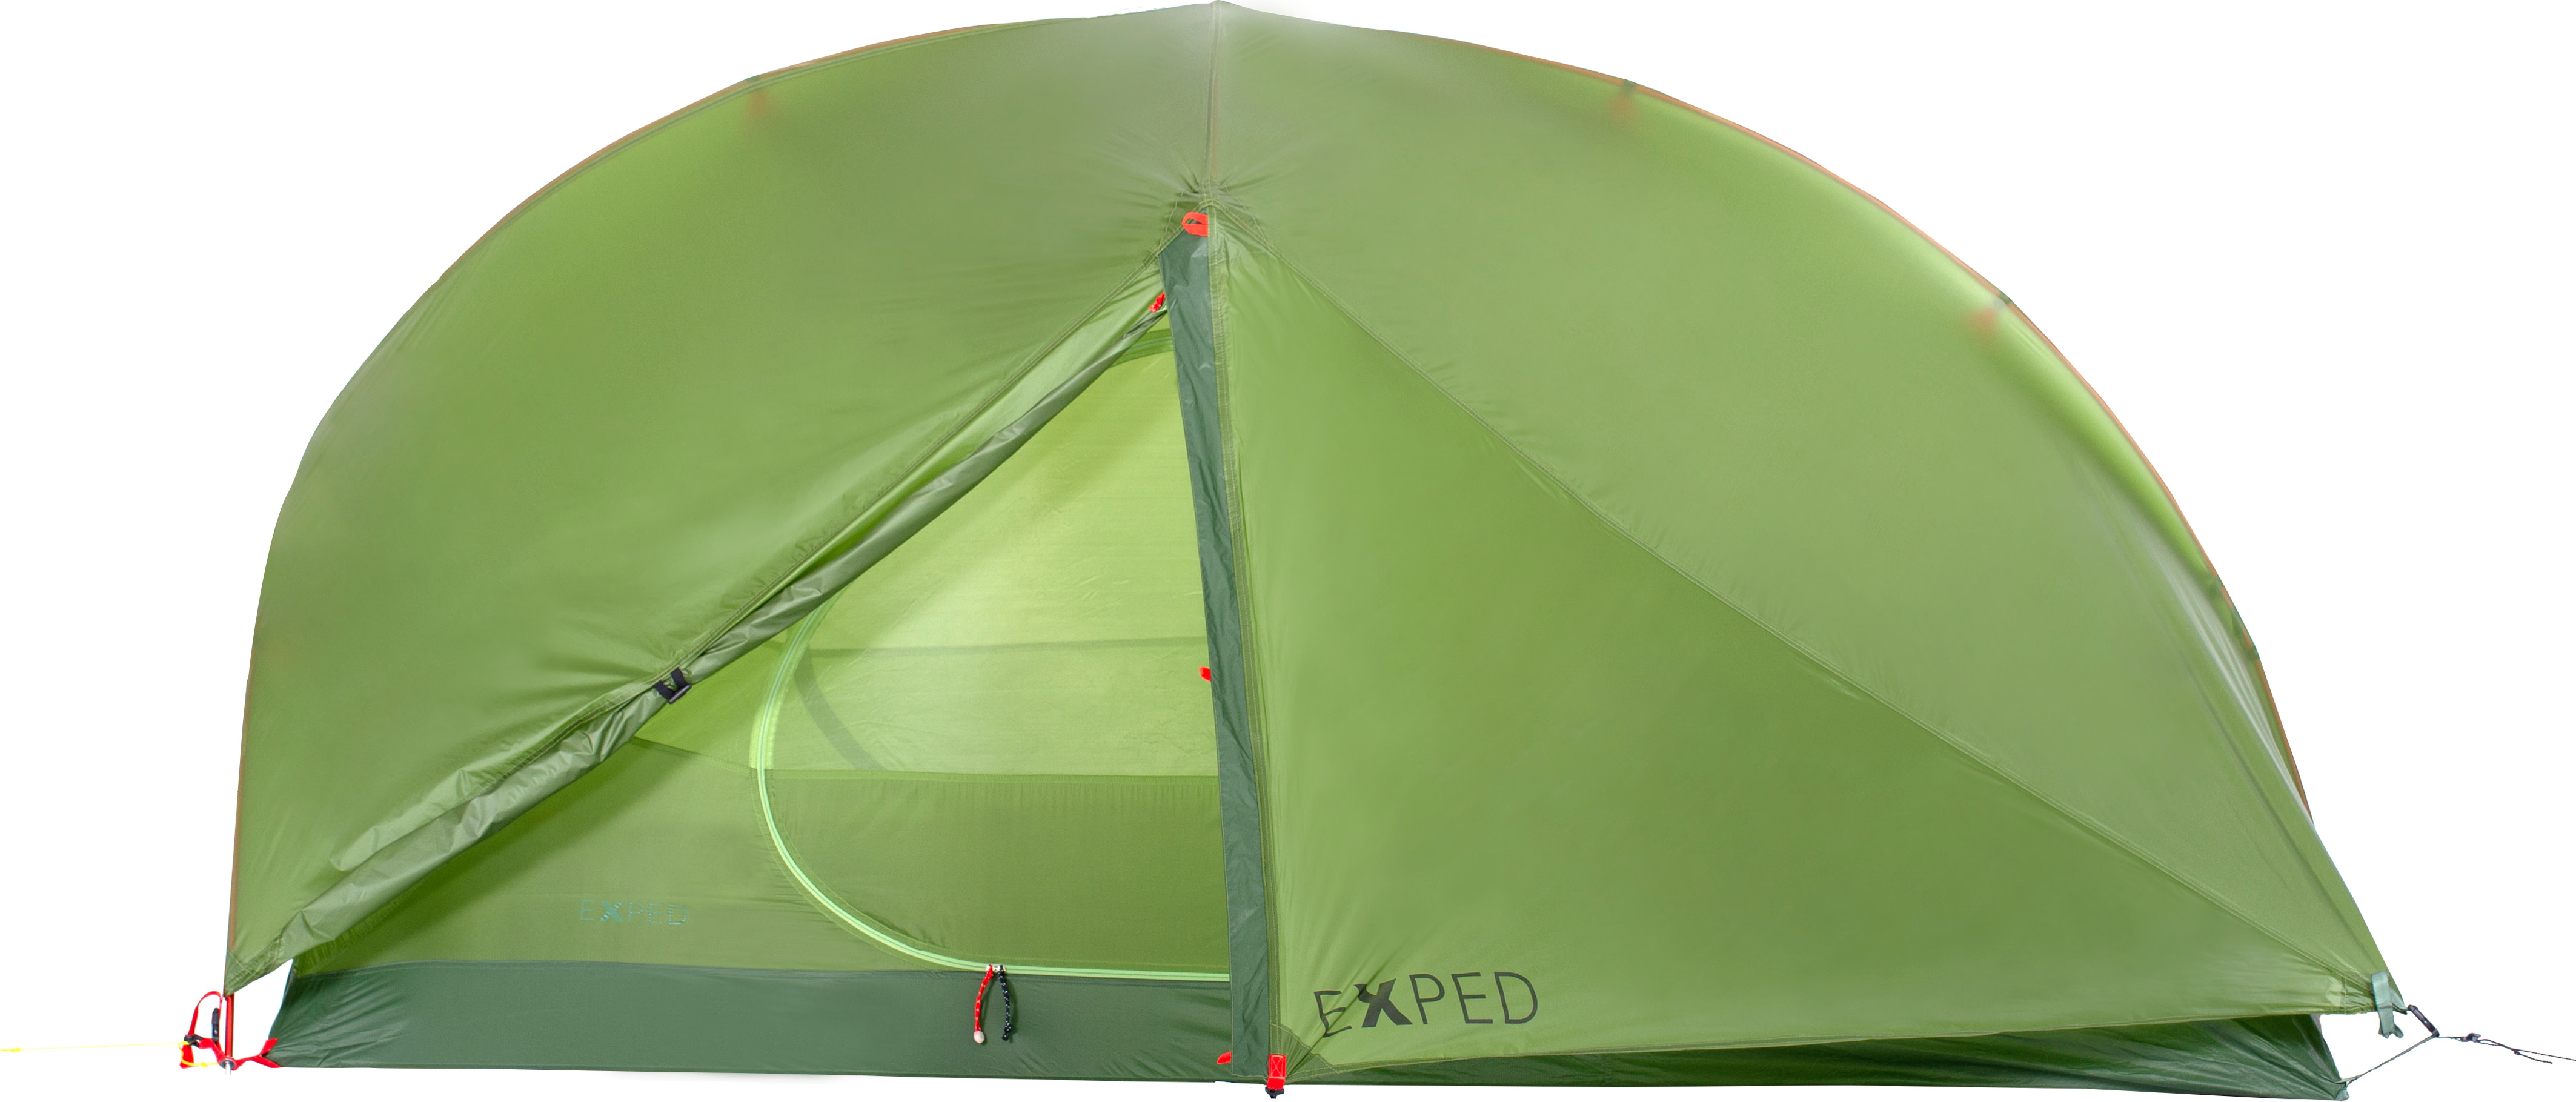 Exped Mira II HL meadow